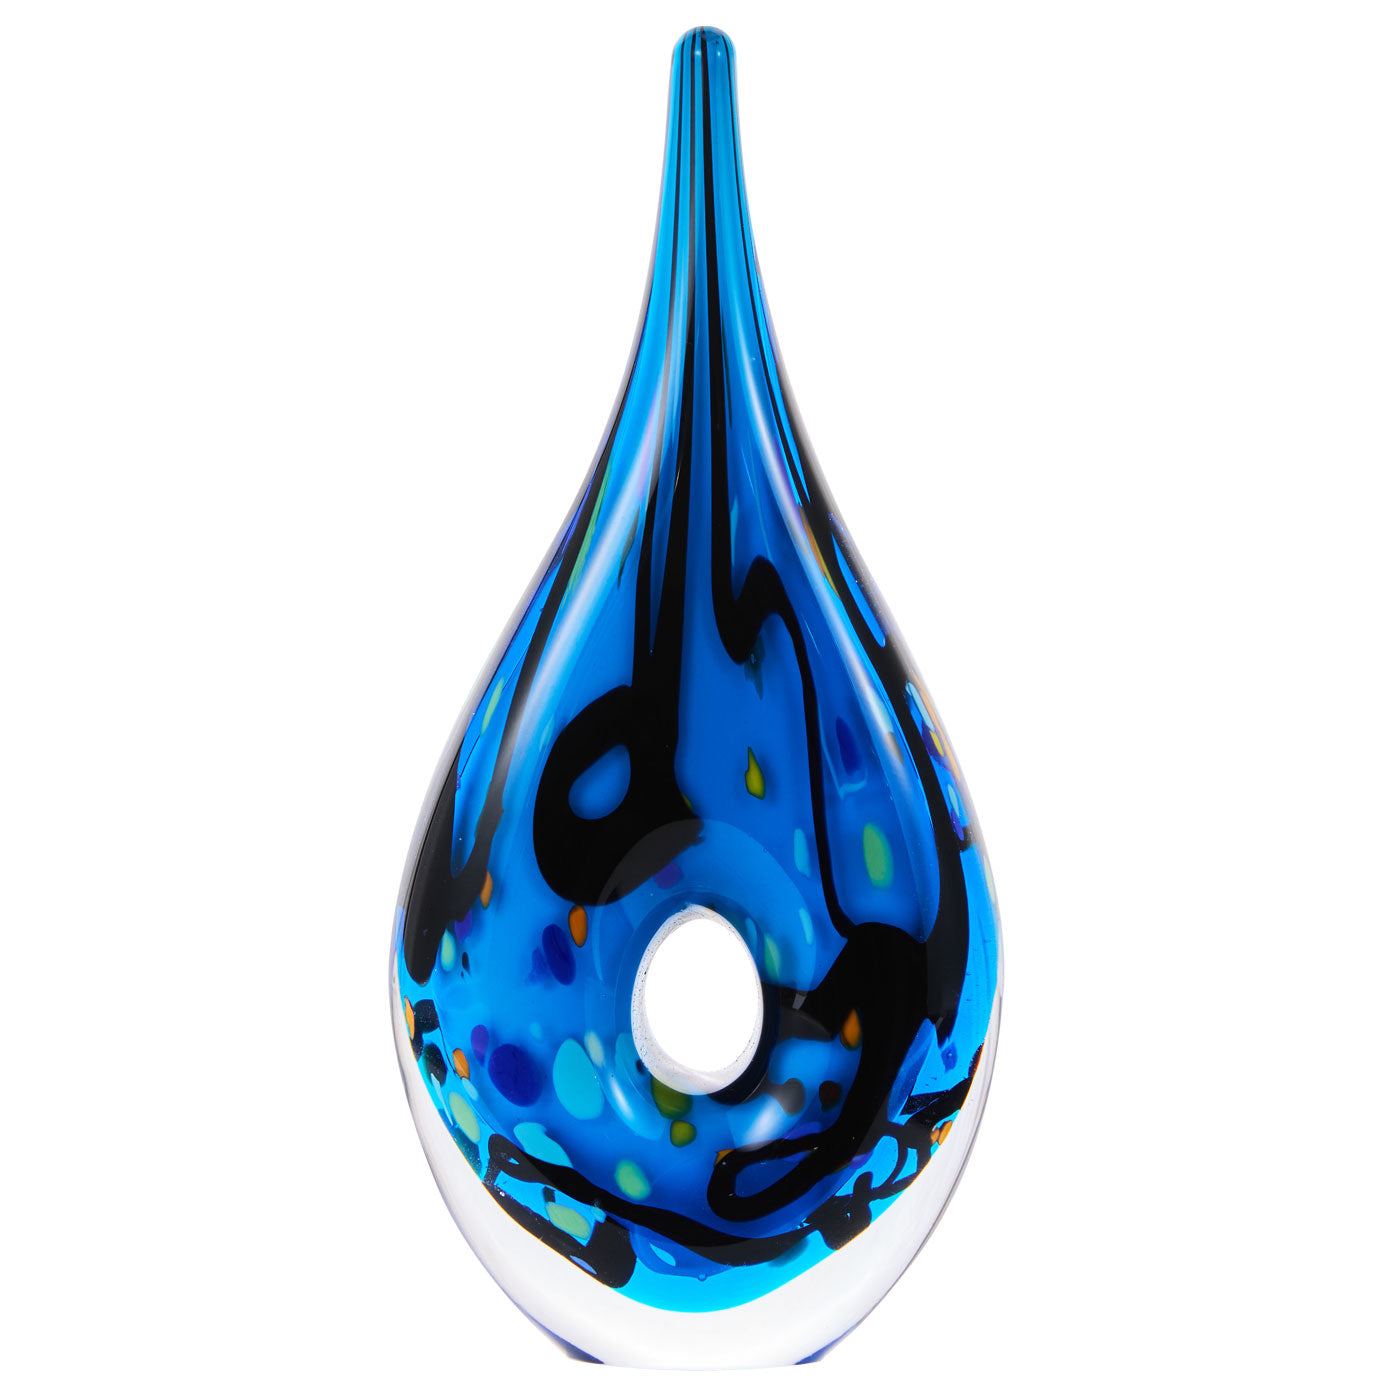 Luxury Lane Hand Blown Abstract Hollow Blue Tear Drop Sommerso Art Glass Sculpture 8.5 inch tall